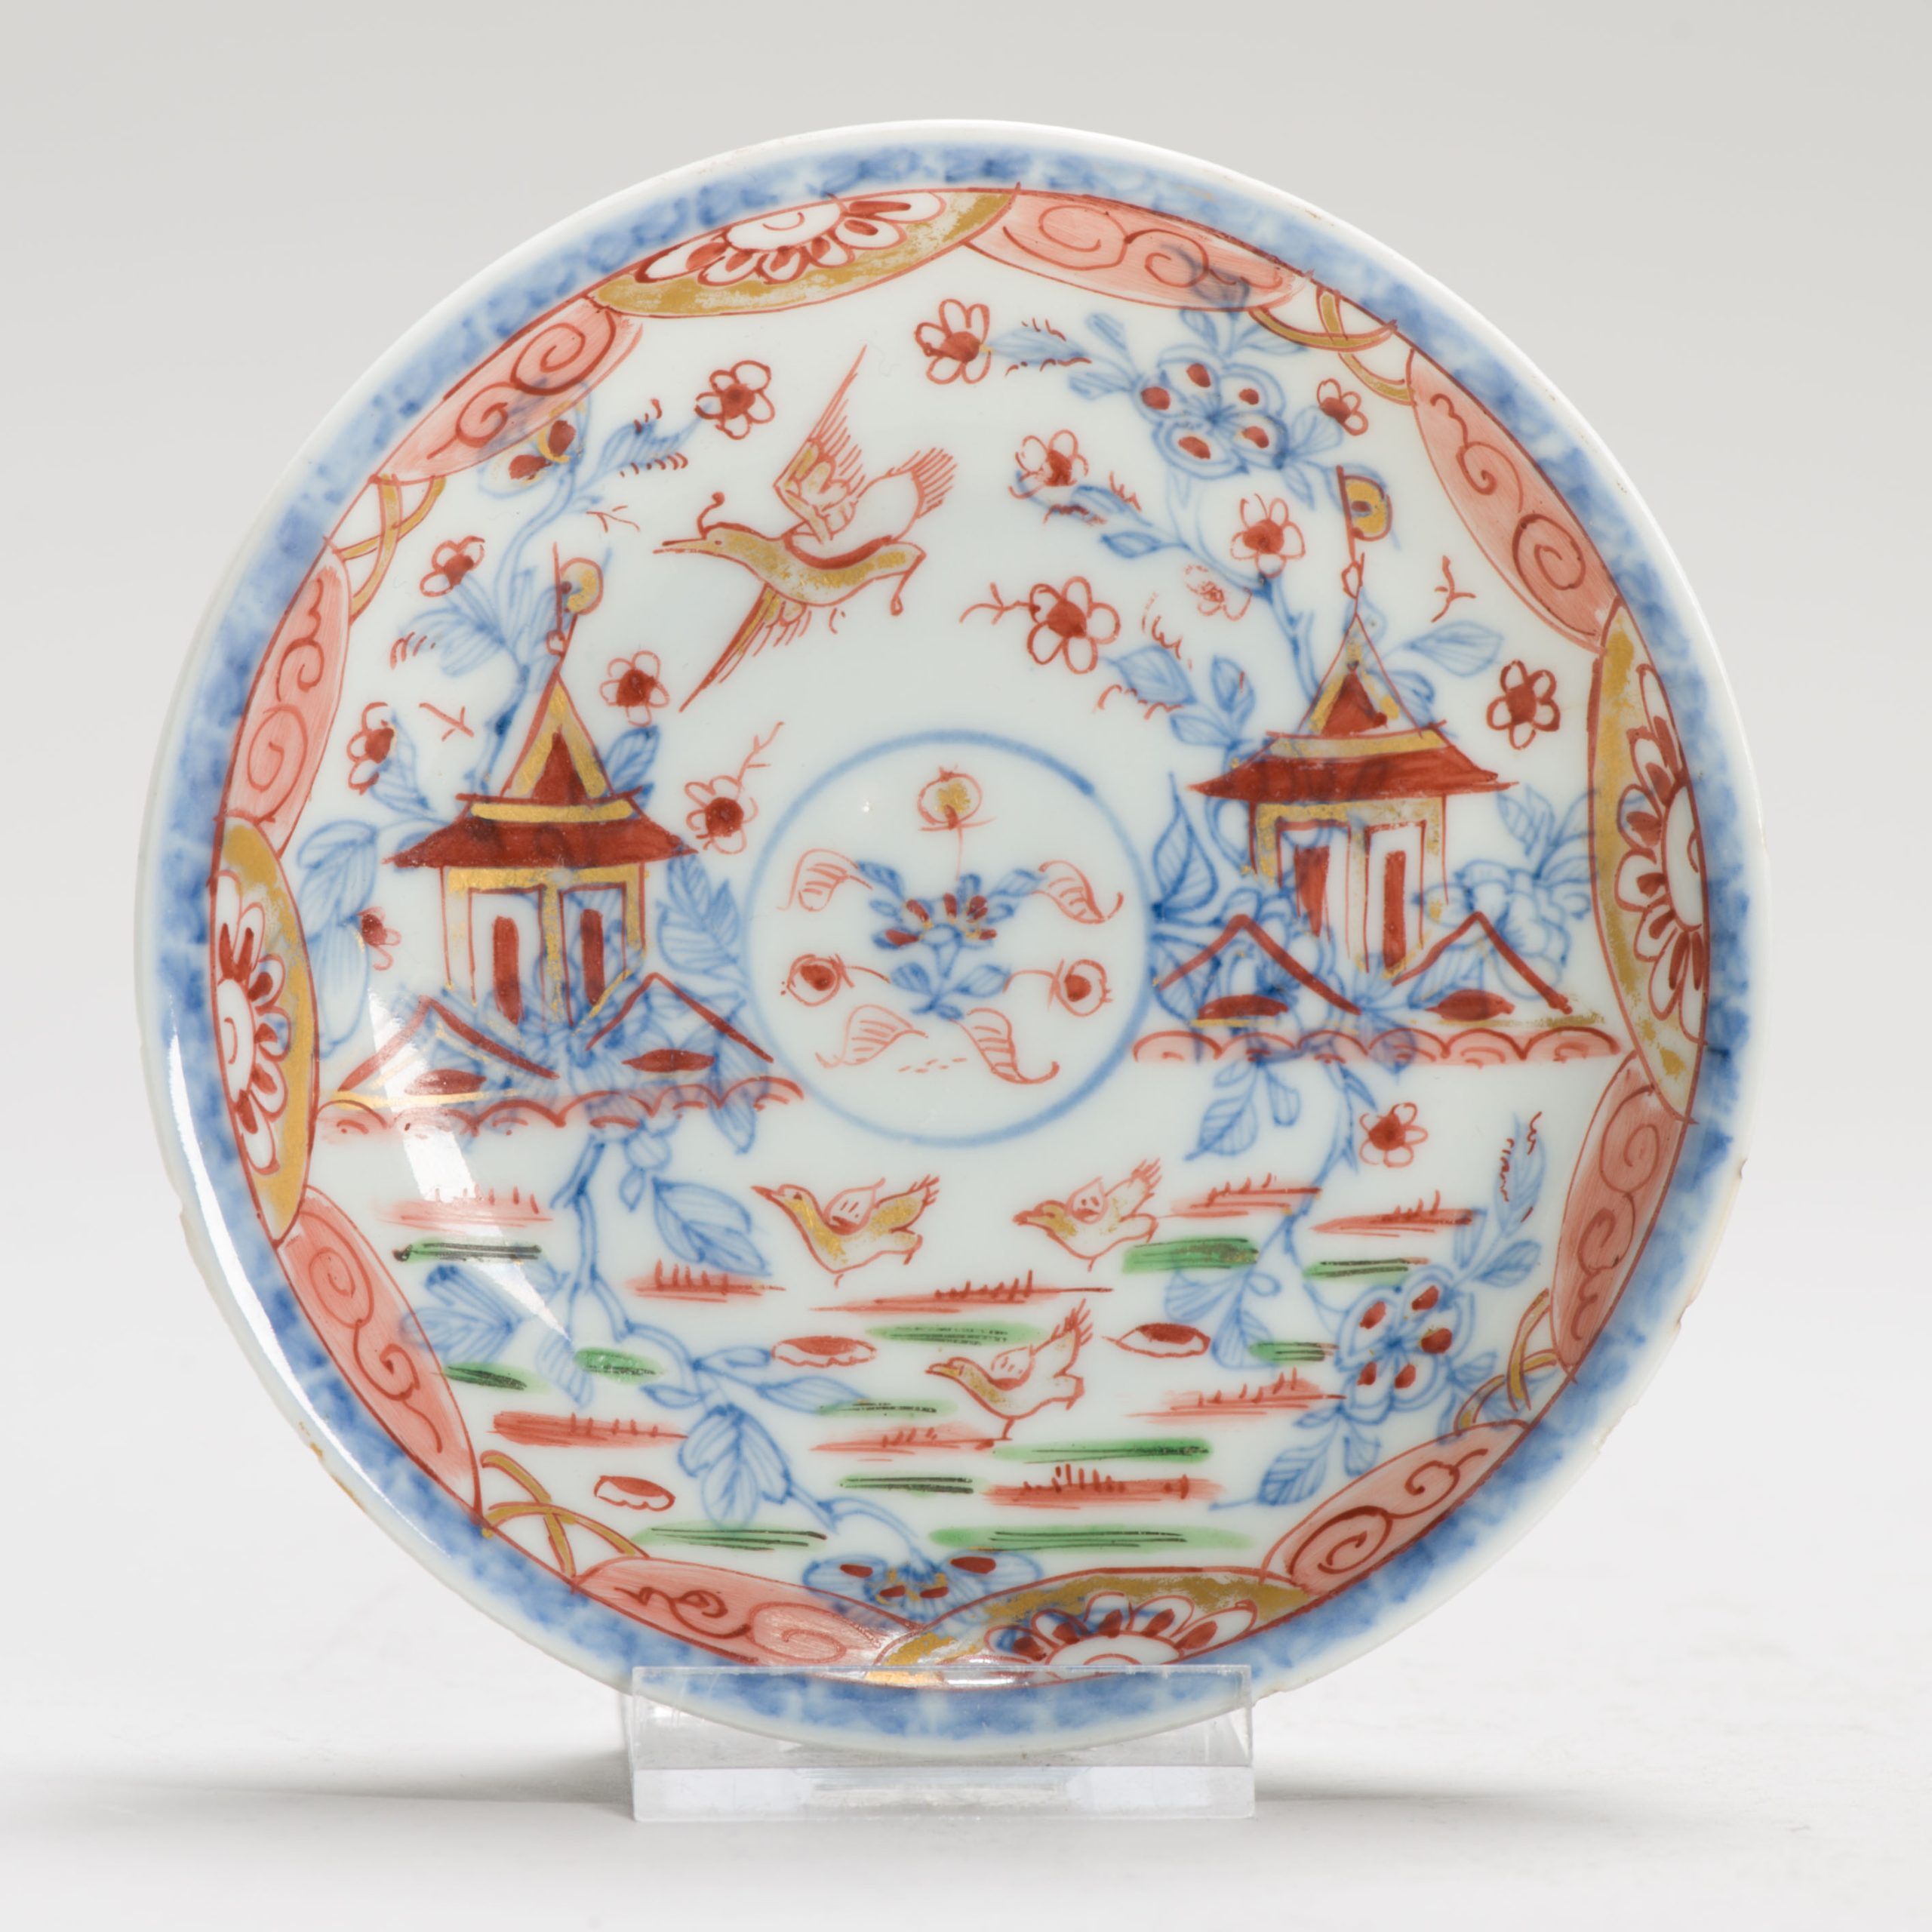 1222 A Lovely Saucer. Painted in Europe on a Chinese blue and white Yongzheng eggshell dish. London Decorated